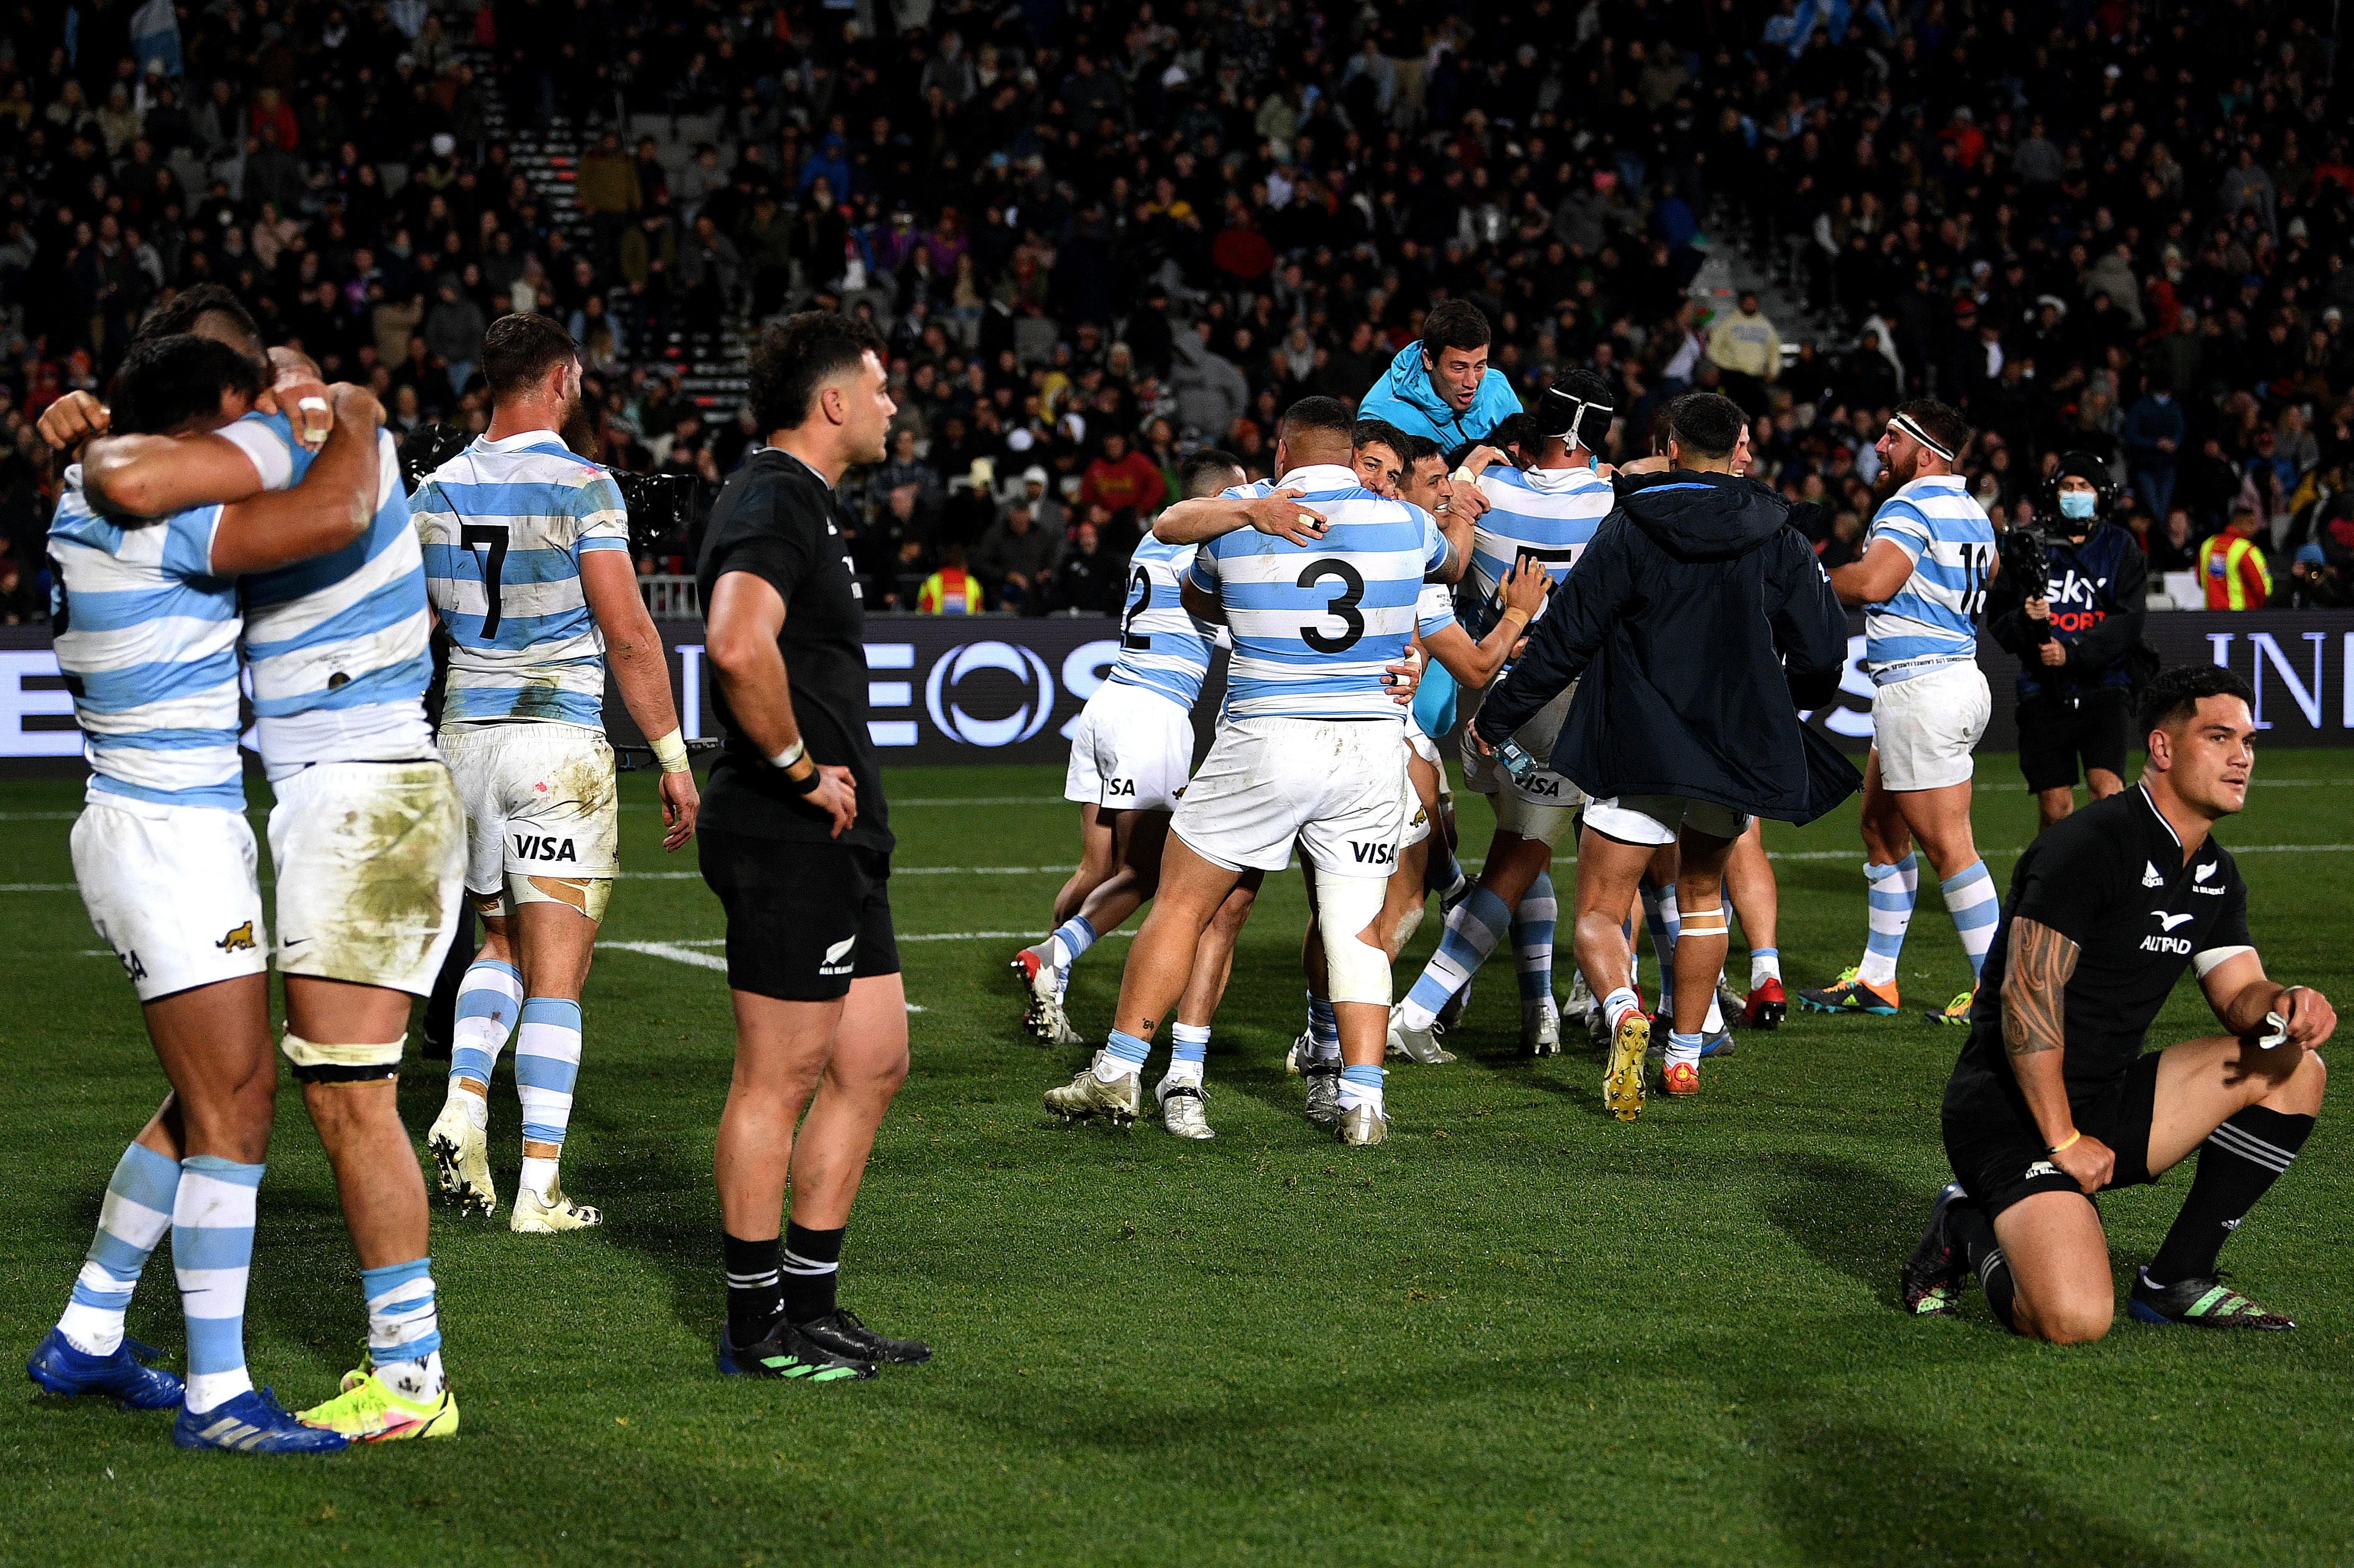 Argentina stunned New Zealand in Christchurch last year